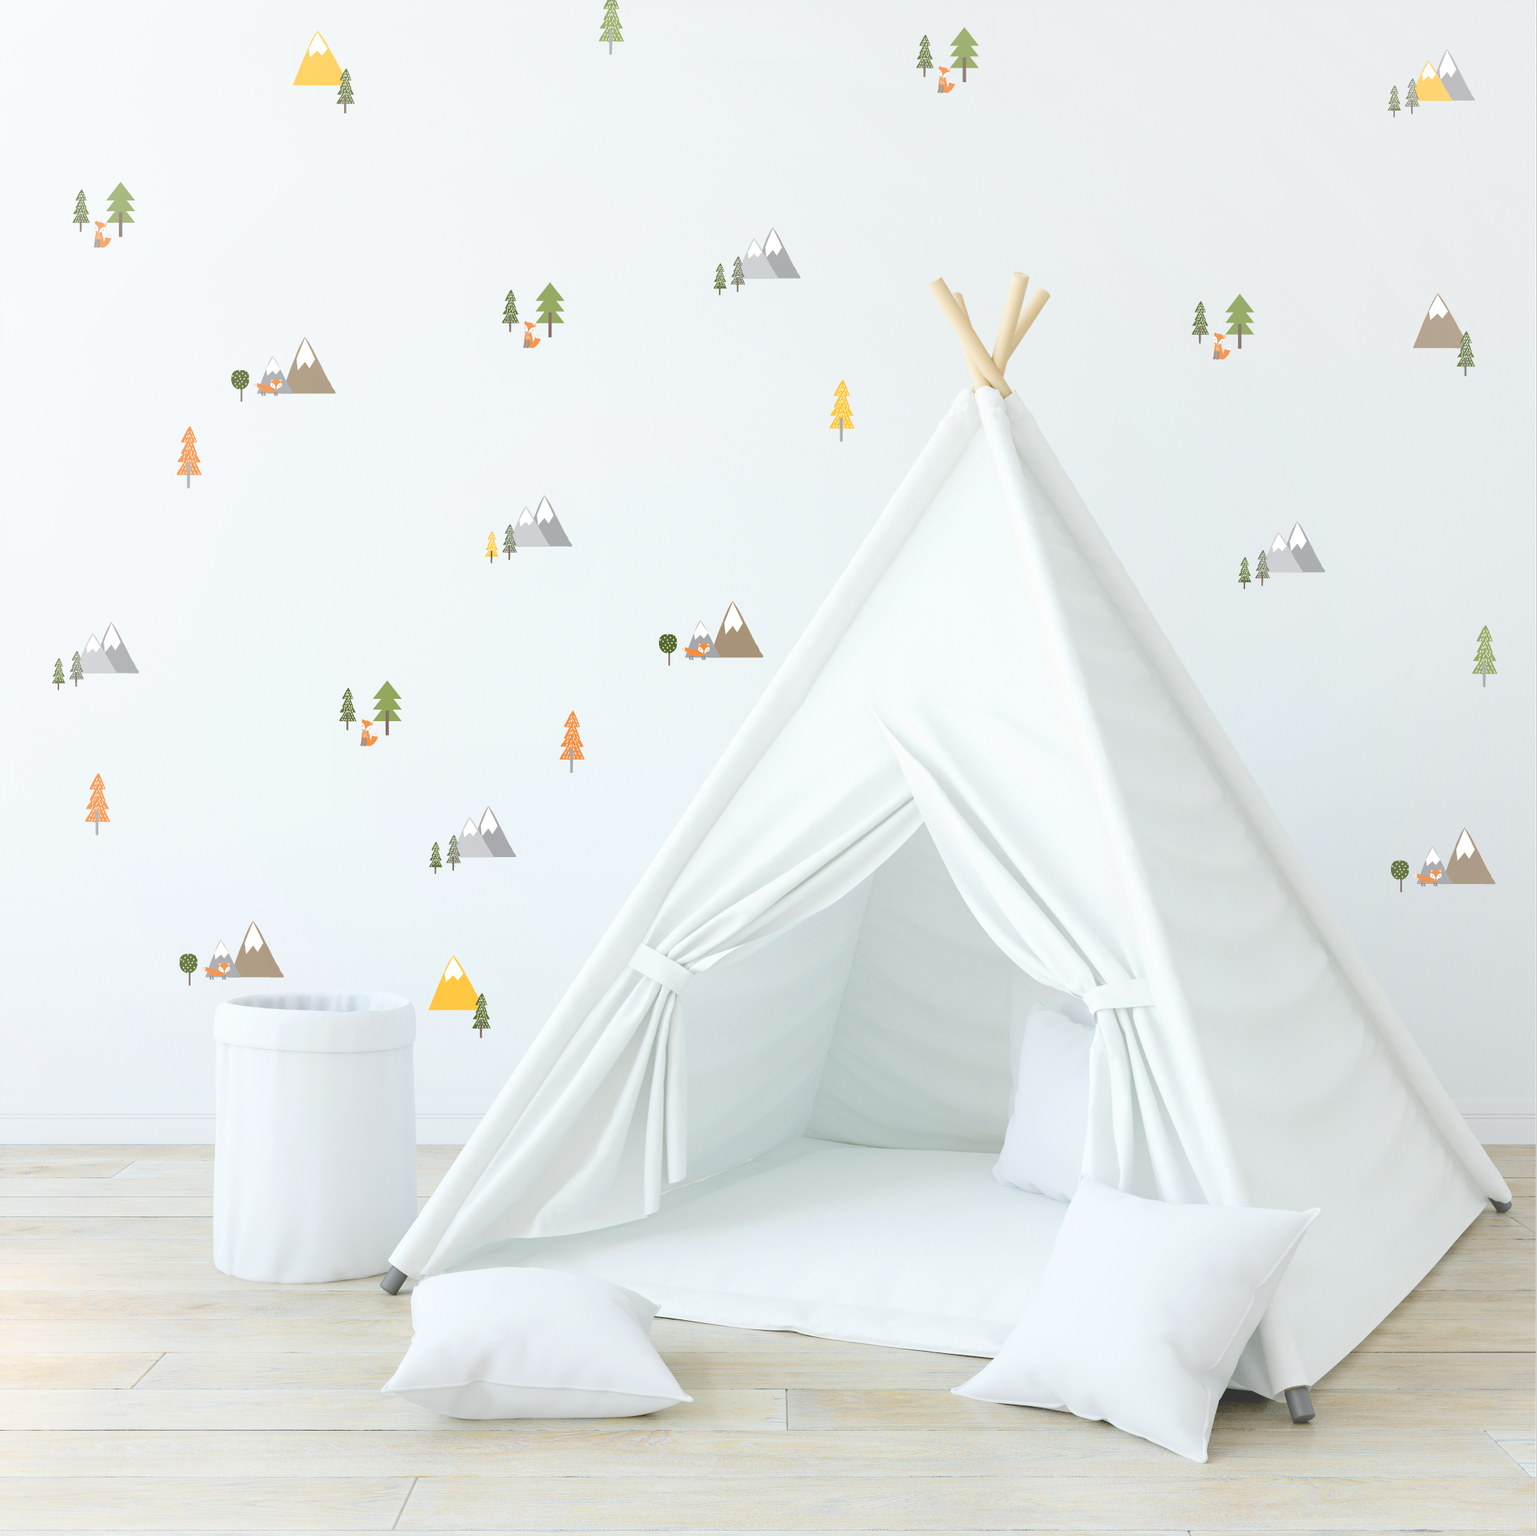 Tiny Mountains & Pine Tree Wall Decals